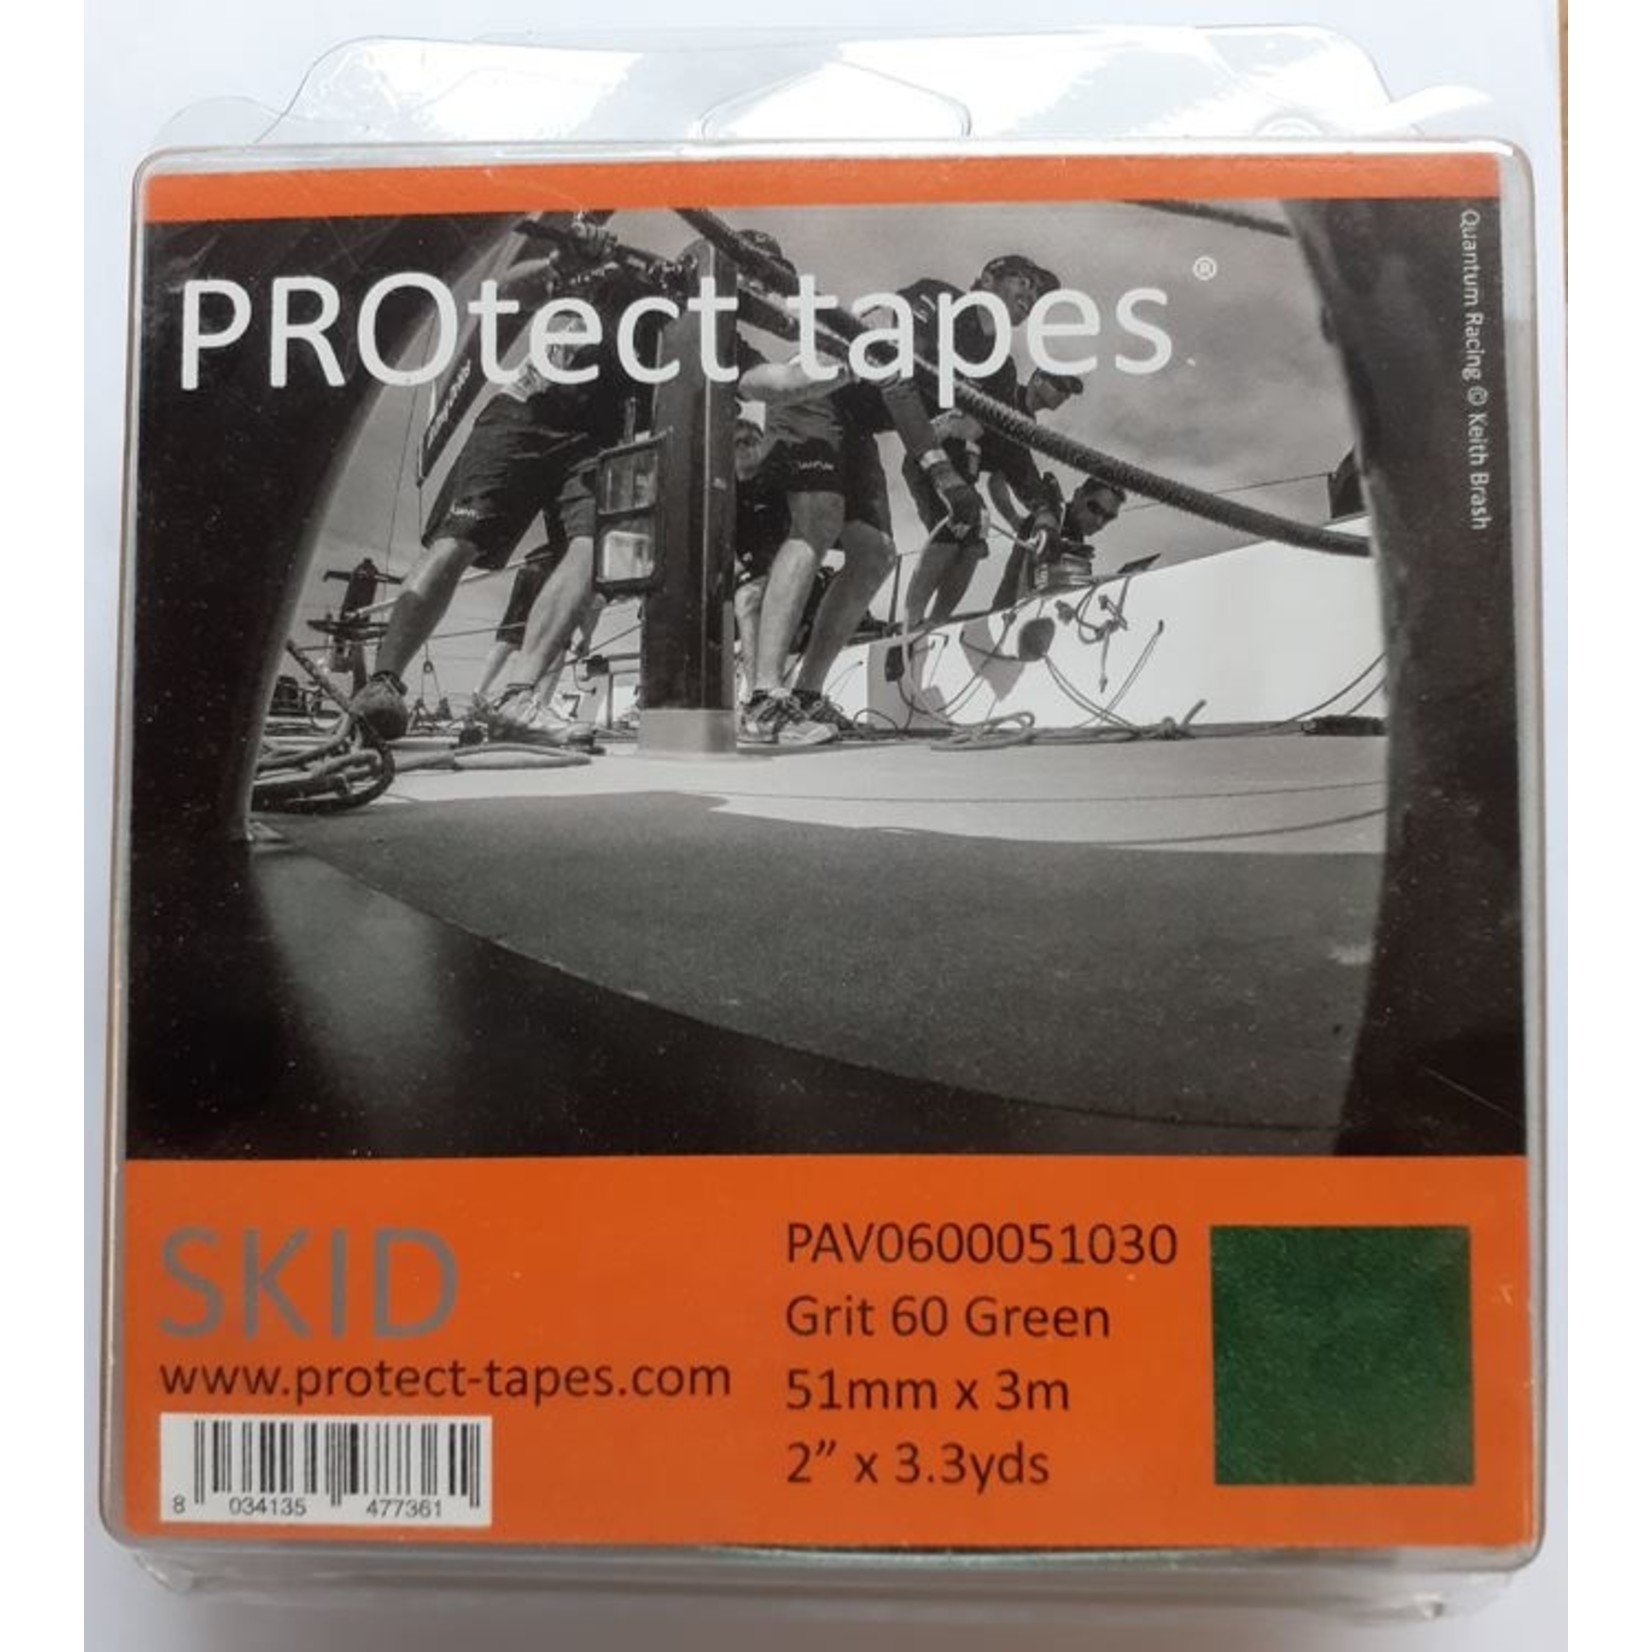 PROtect Tapes Skid 60 grit 51mm x 3m green